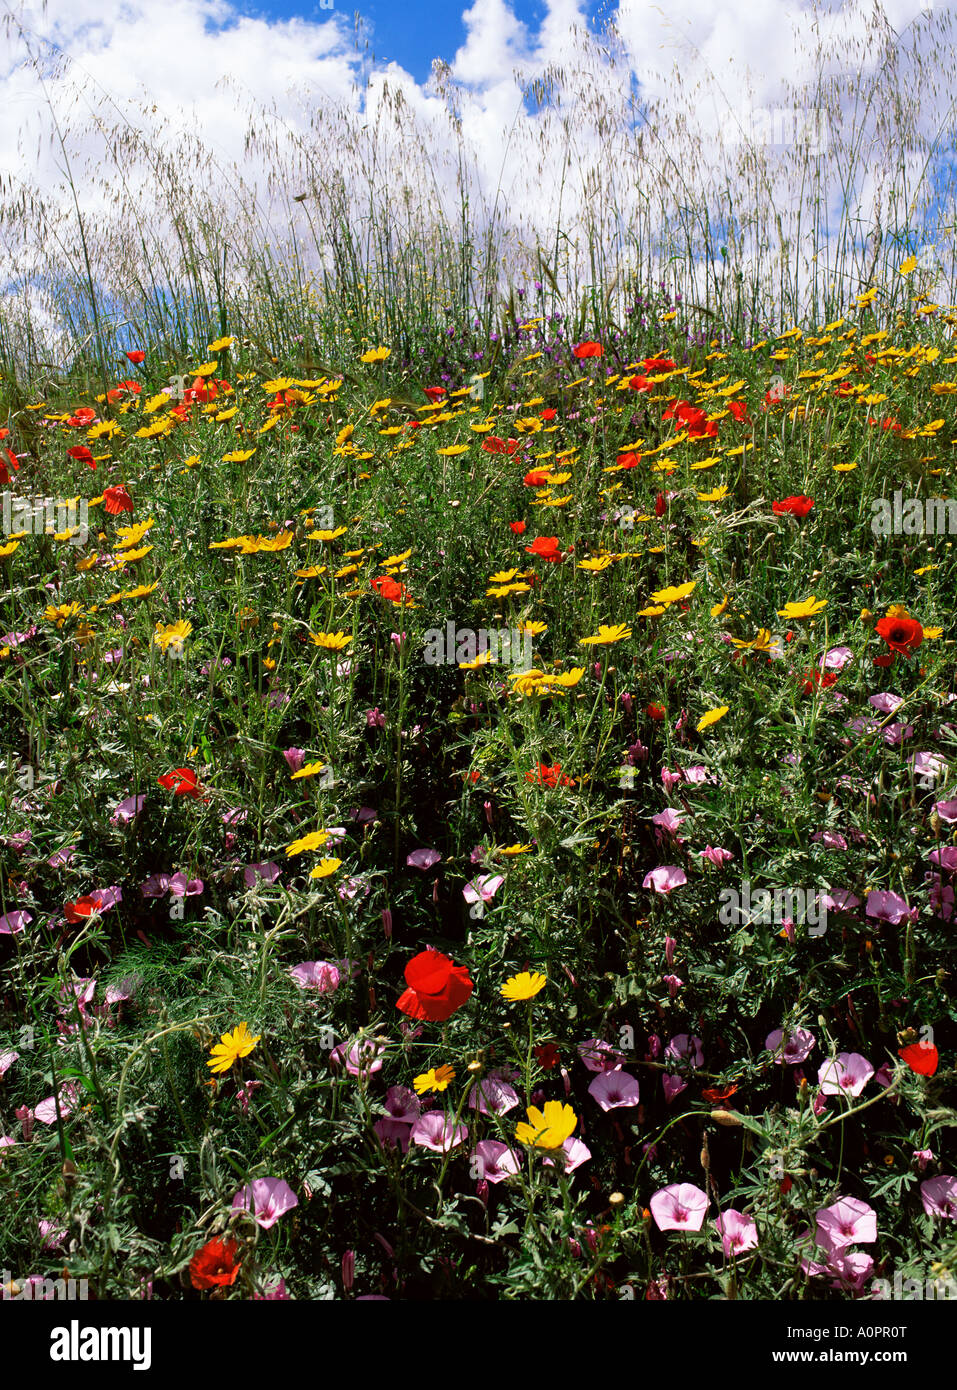 April spring flowers near Aidone central area island of Sicily Italy Mediterranean Europe Stock Photo